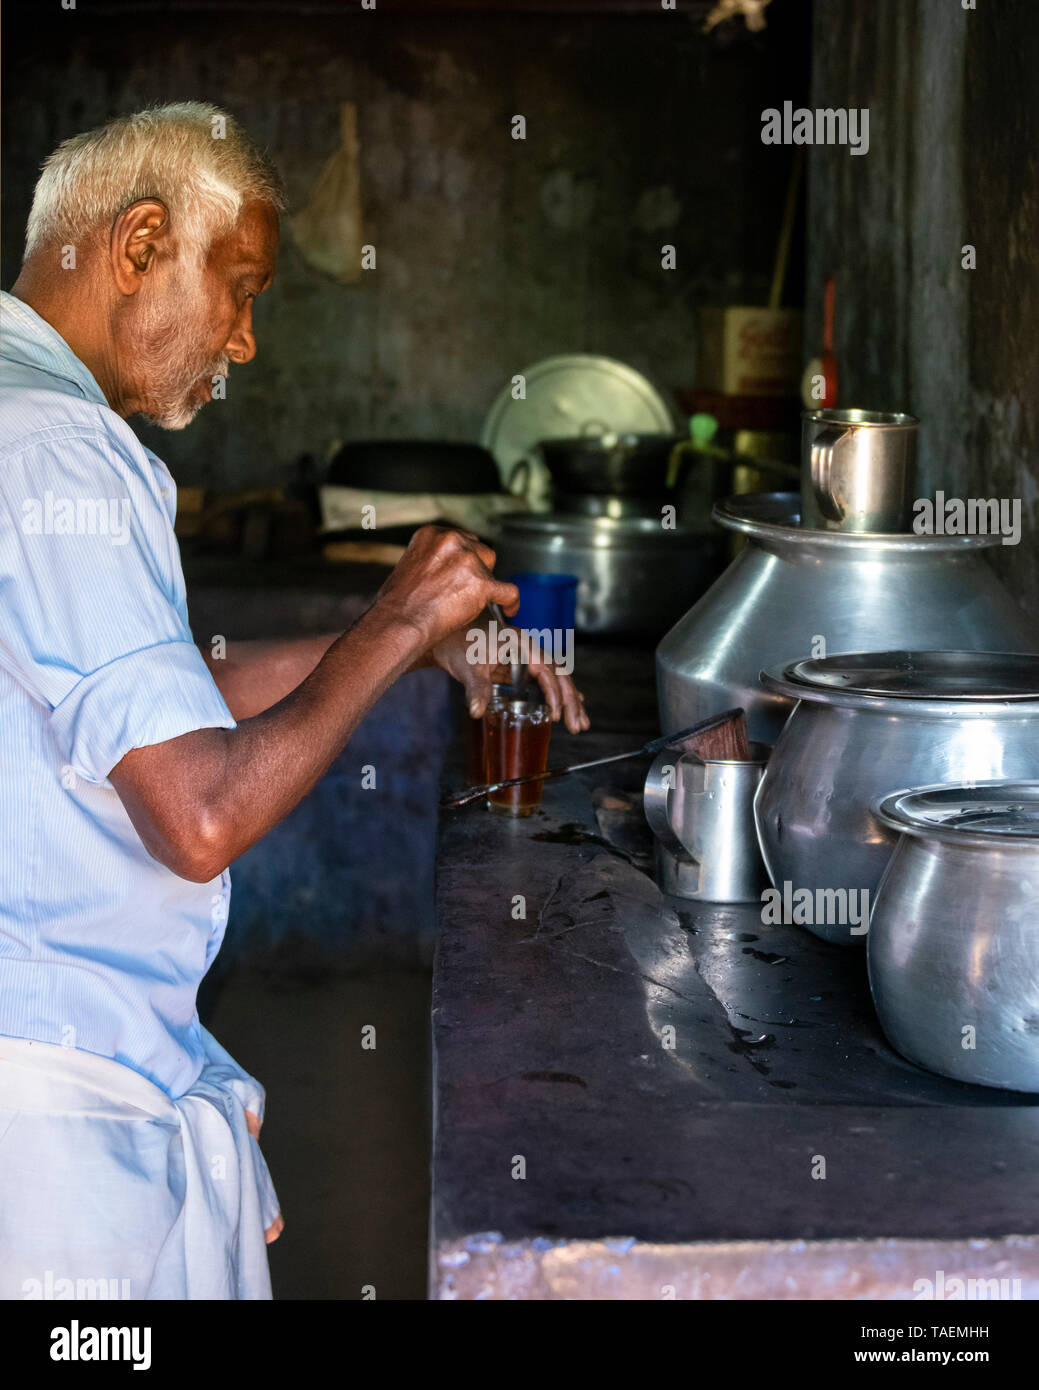 Horizontal Vertical Square view of a man making tea in India. Stock Photo